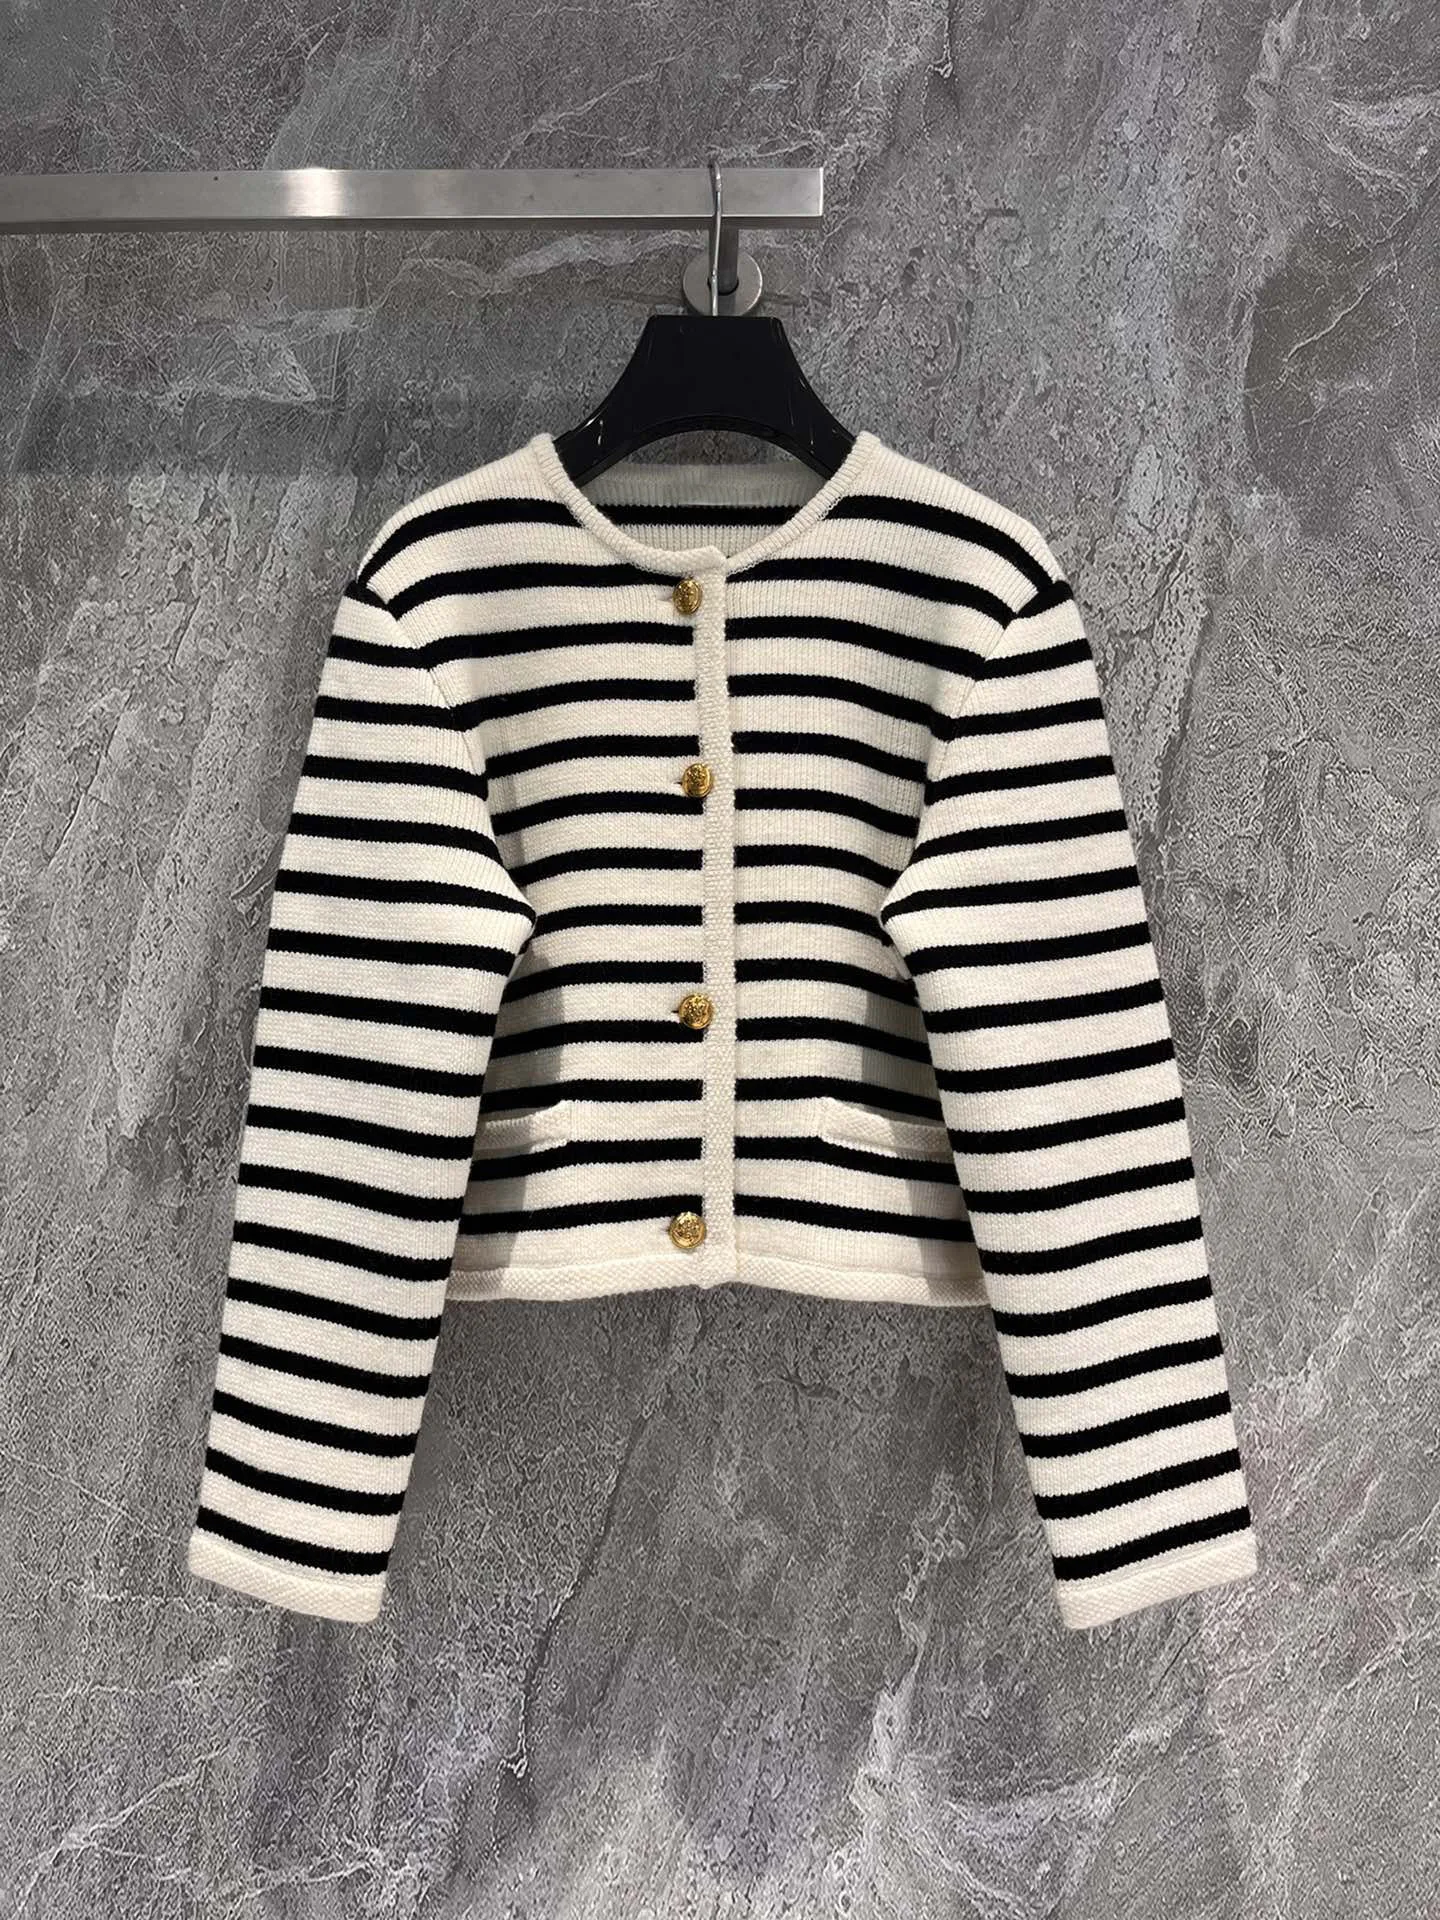 

2023 Women's Clothing High Quality Striped 70% Wool Cardigans Coat Female Chic SweaterAutumn Winter New 1056